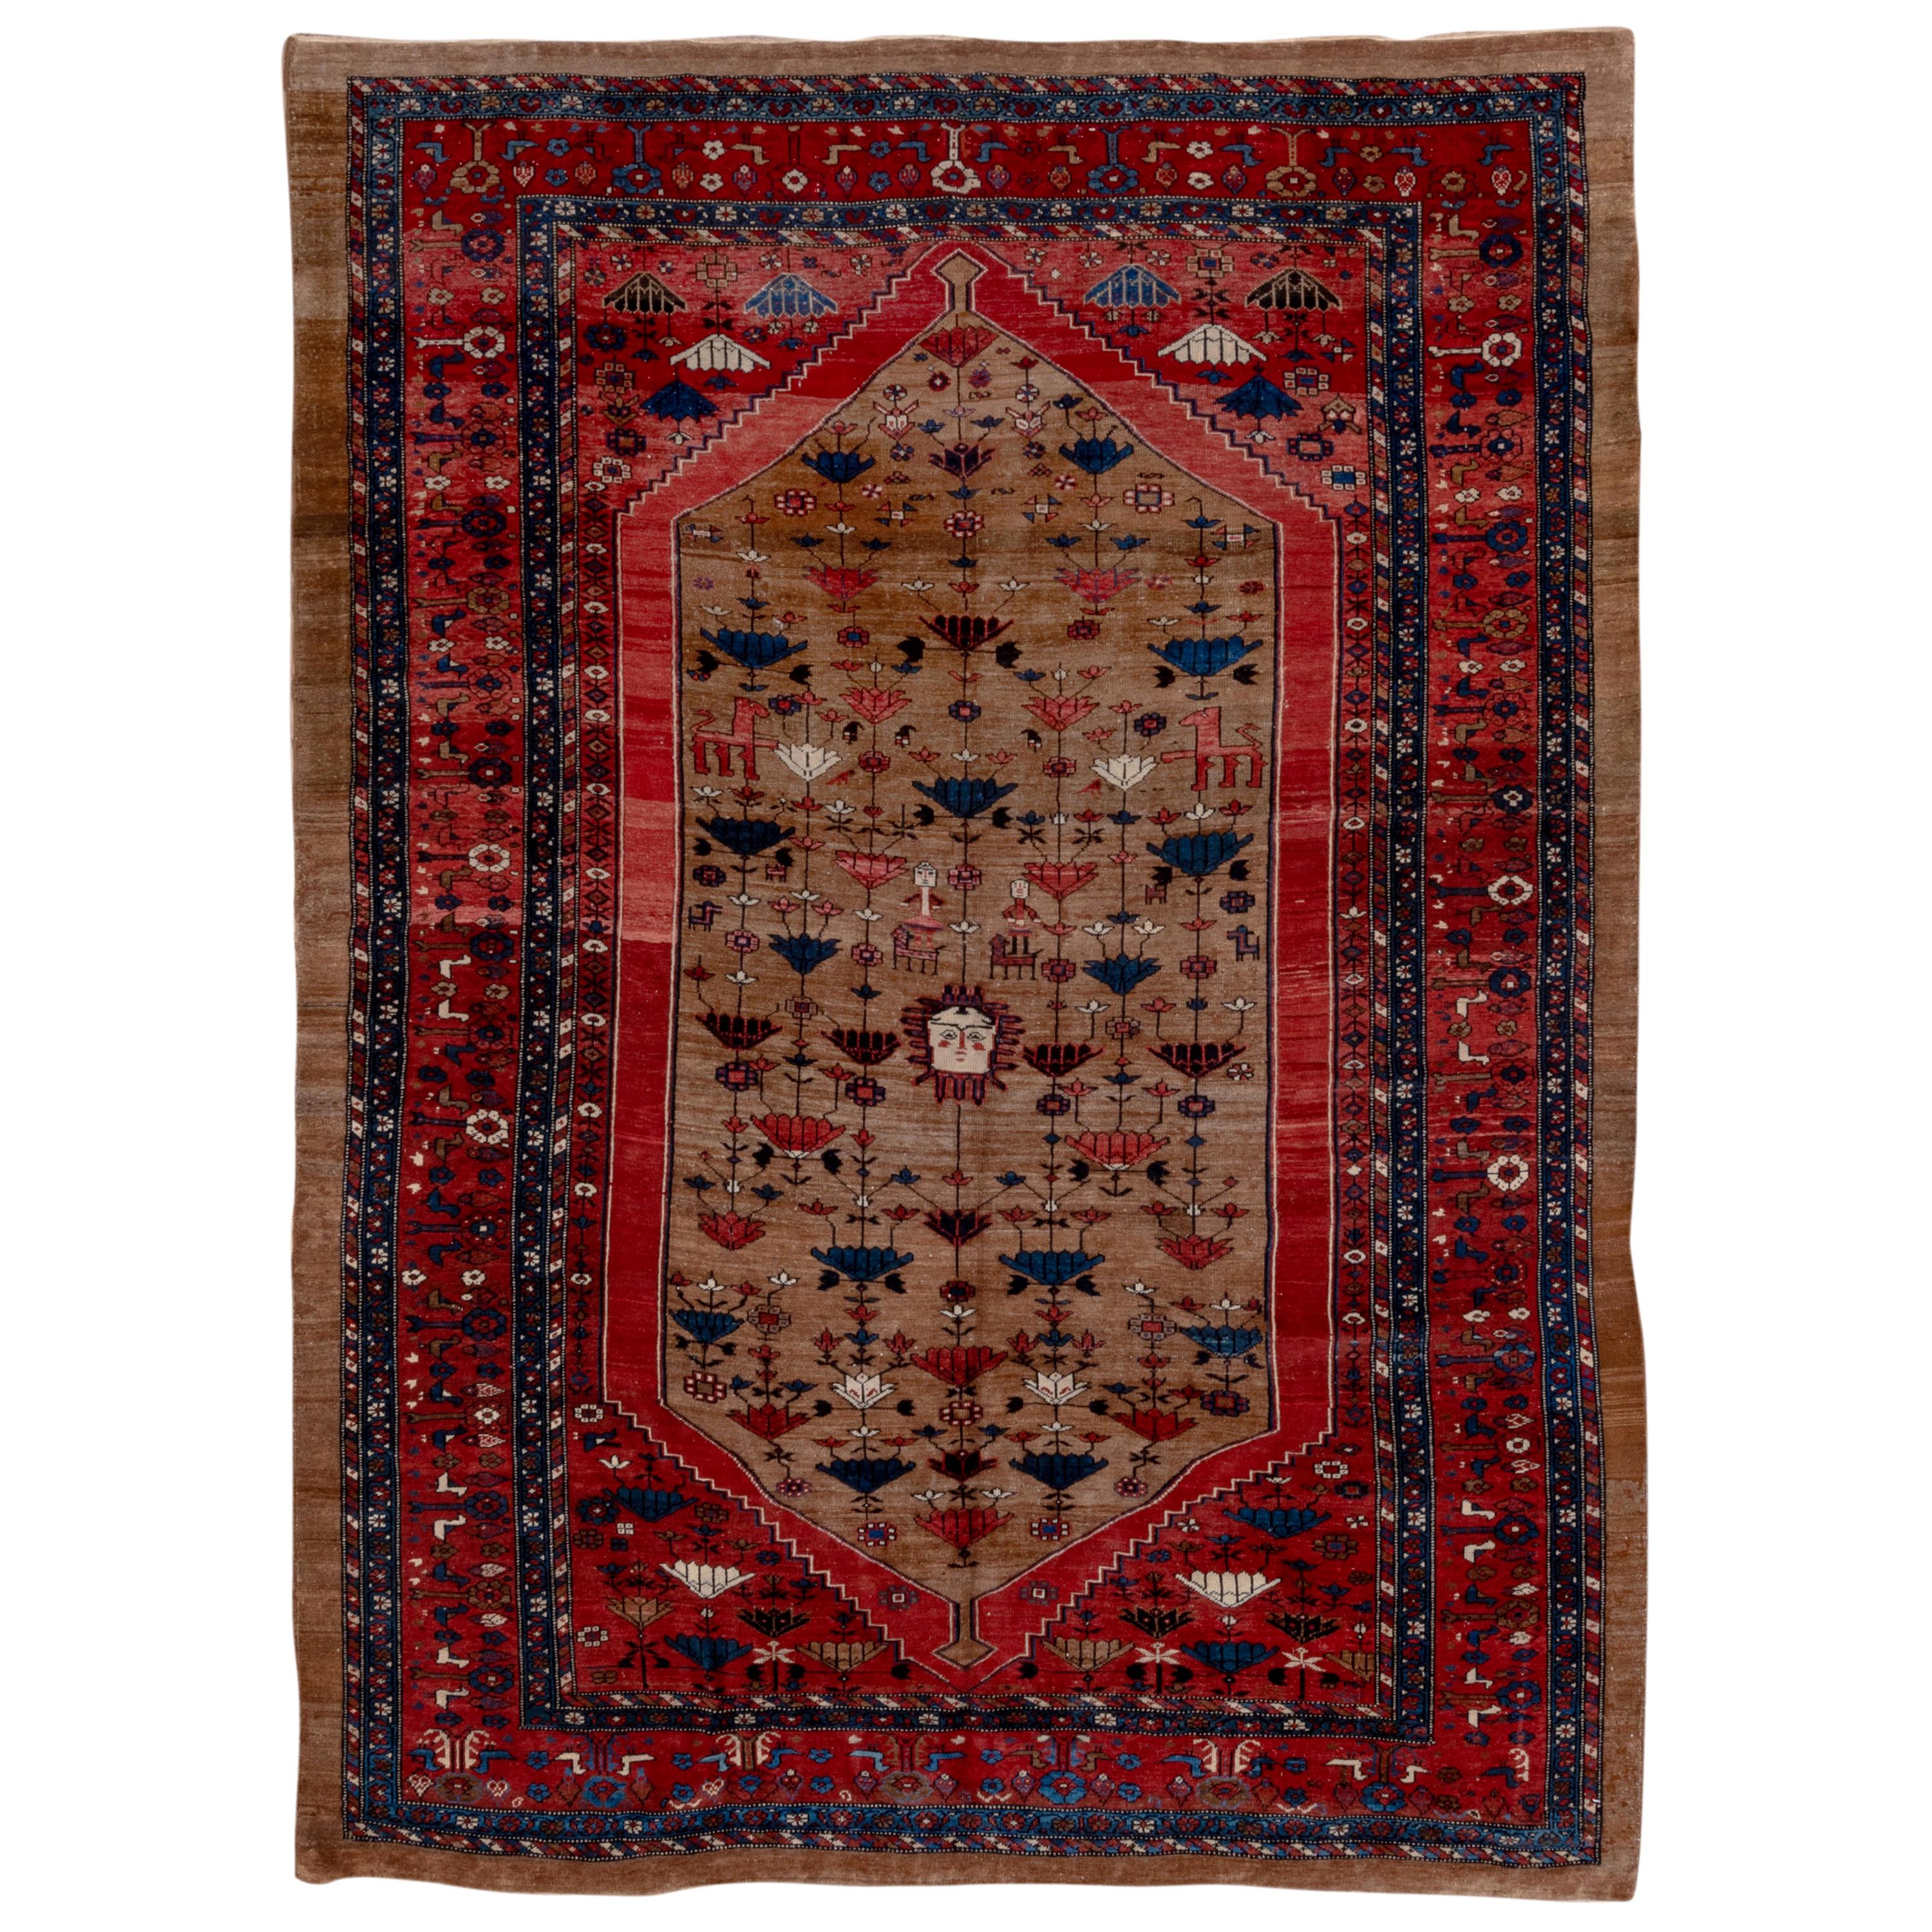 Rare Antique Heriz Bakhshayesh Carpet, Brown and Rich Red Field, B For Sale